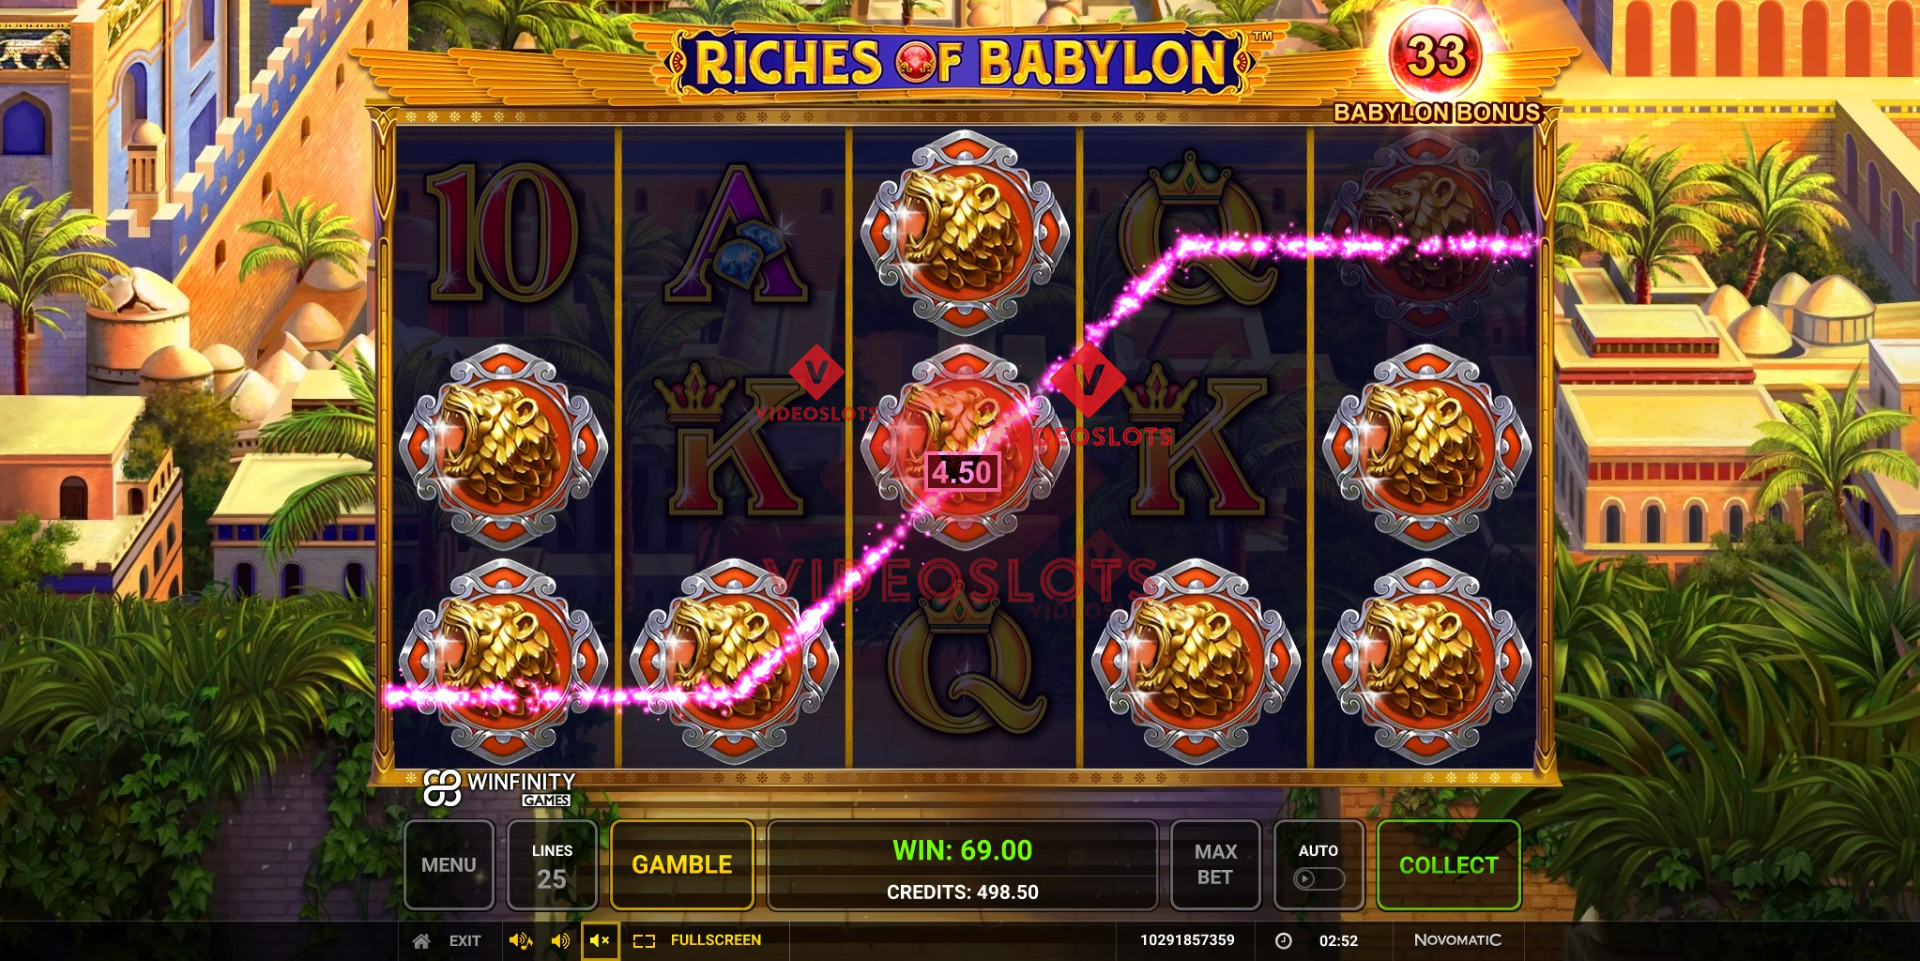 Base Game for Riches of Babylon slot from Greentube